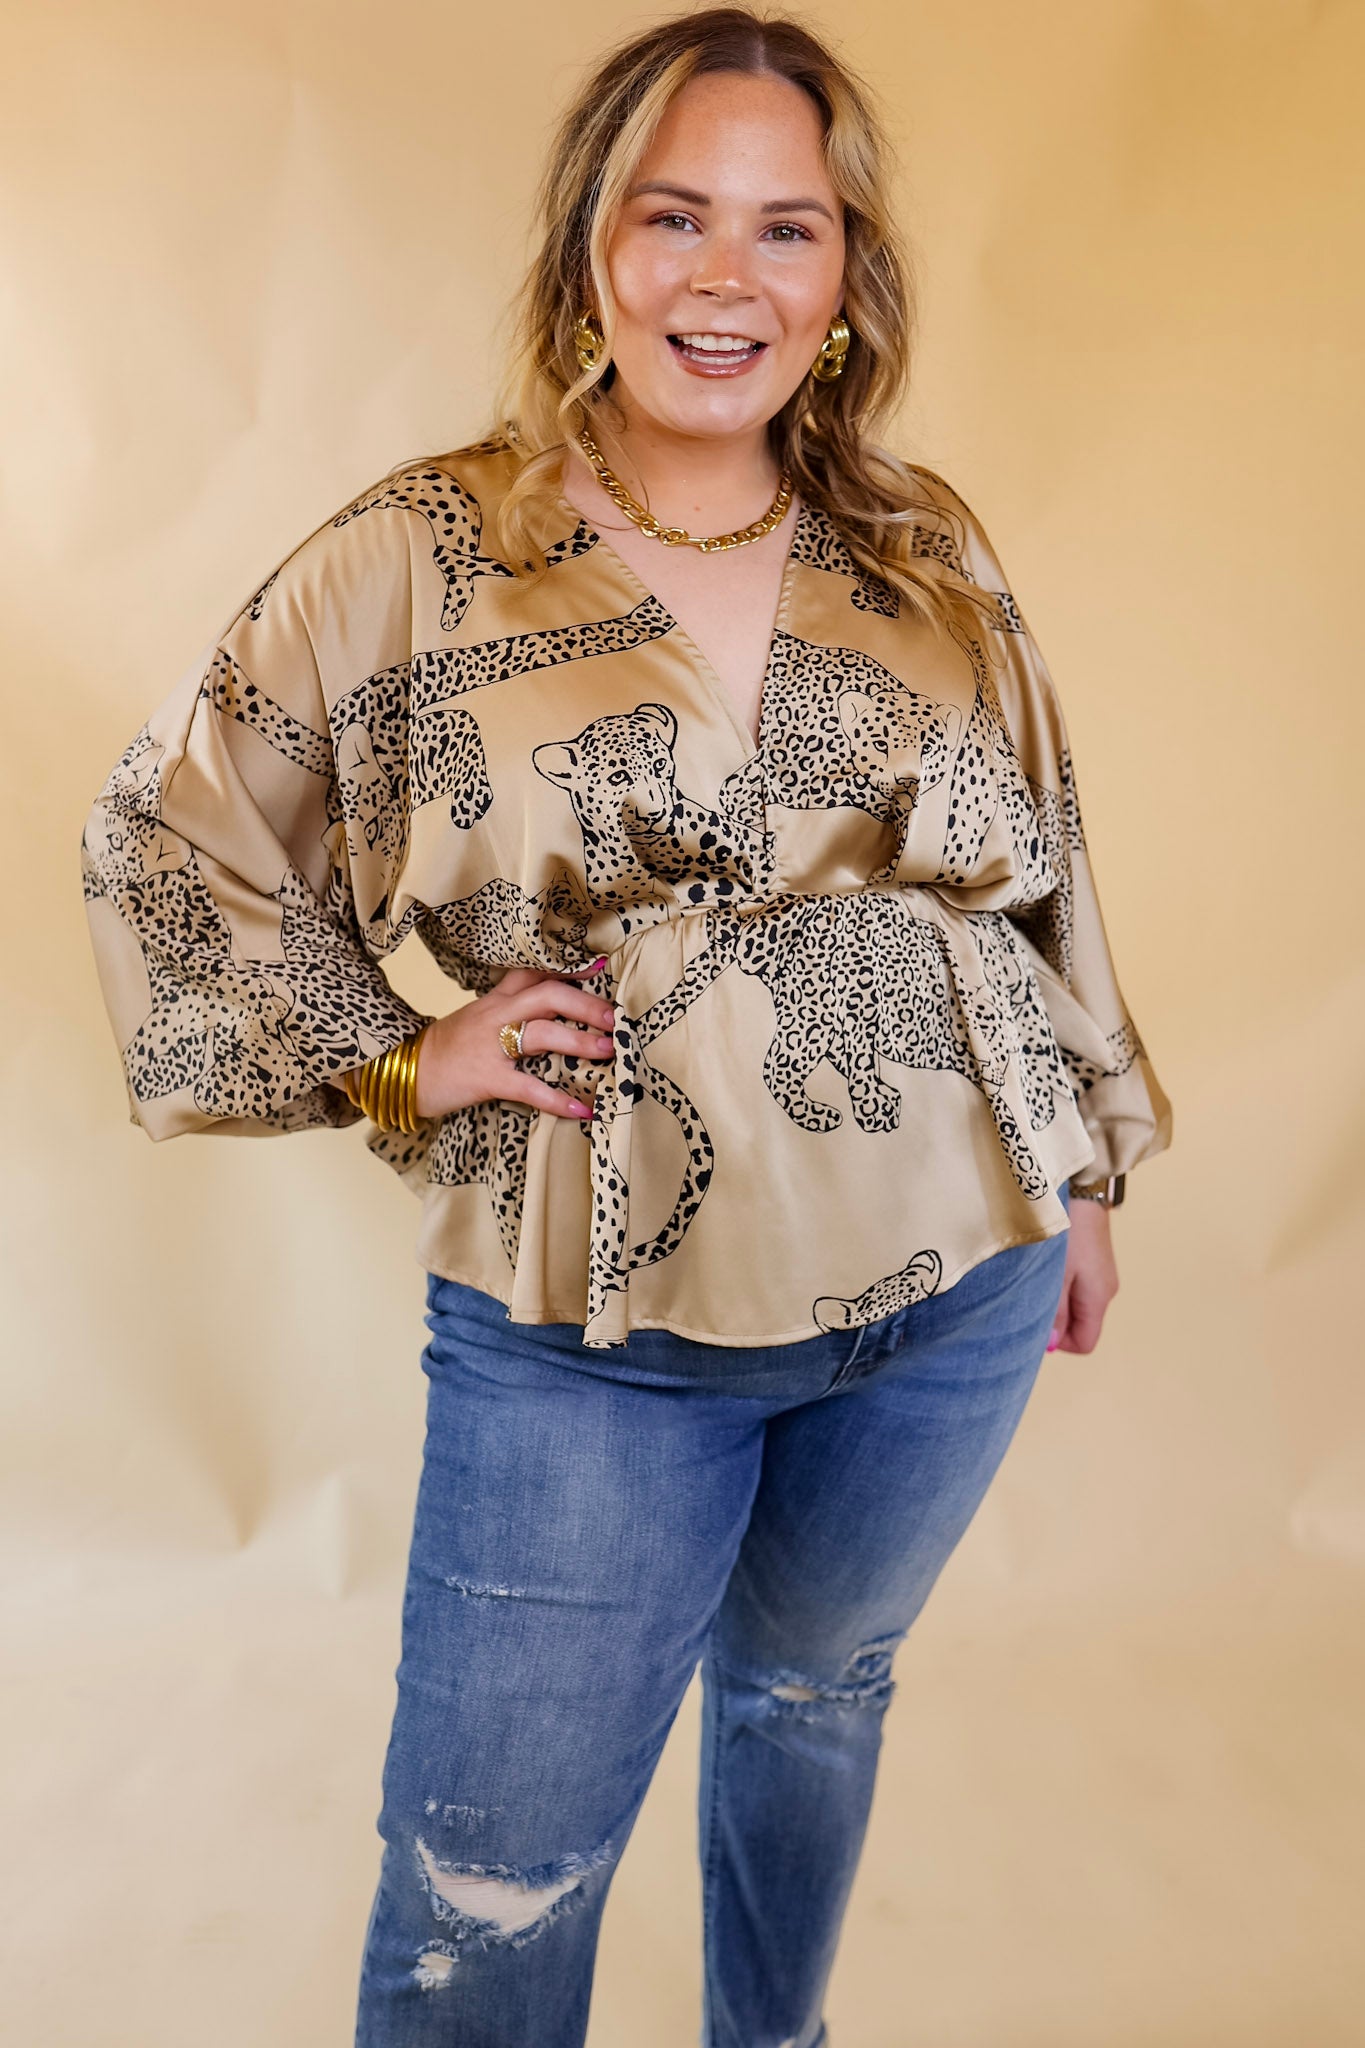 Central Ave Sweetness Leopard Print Peplum Top in Tan - Giddy Up Glamour Boutique